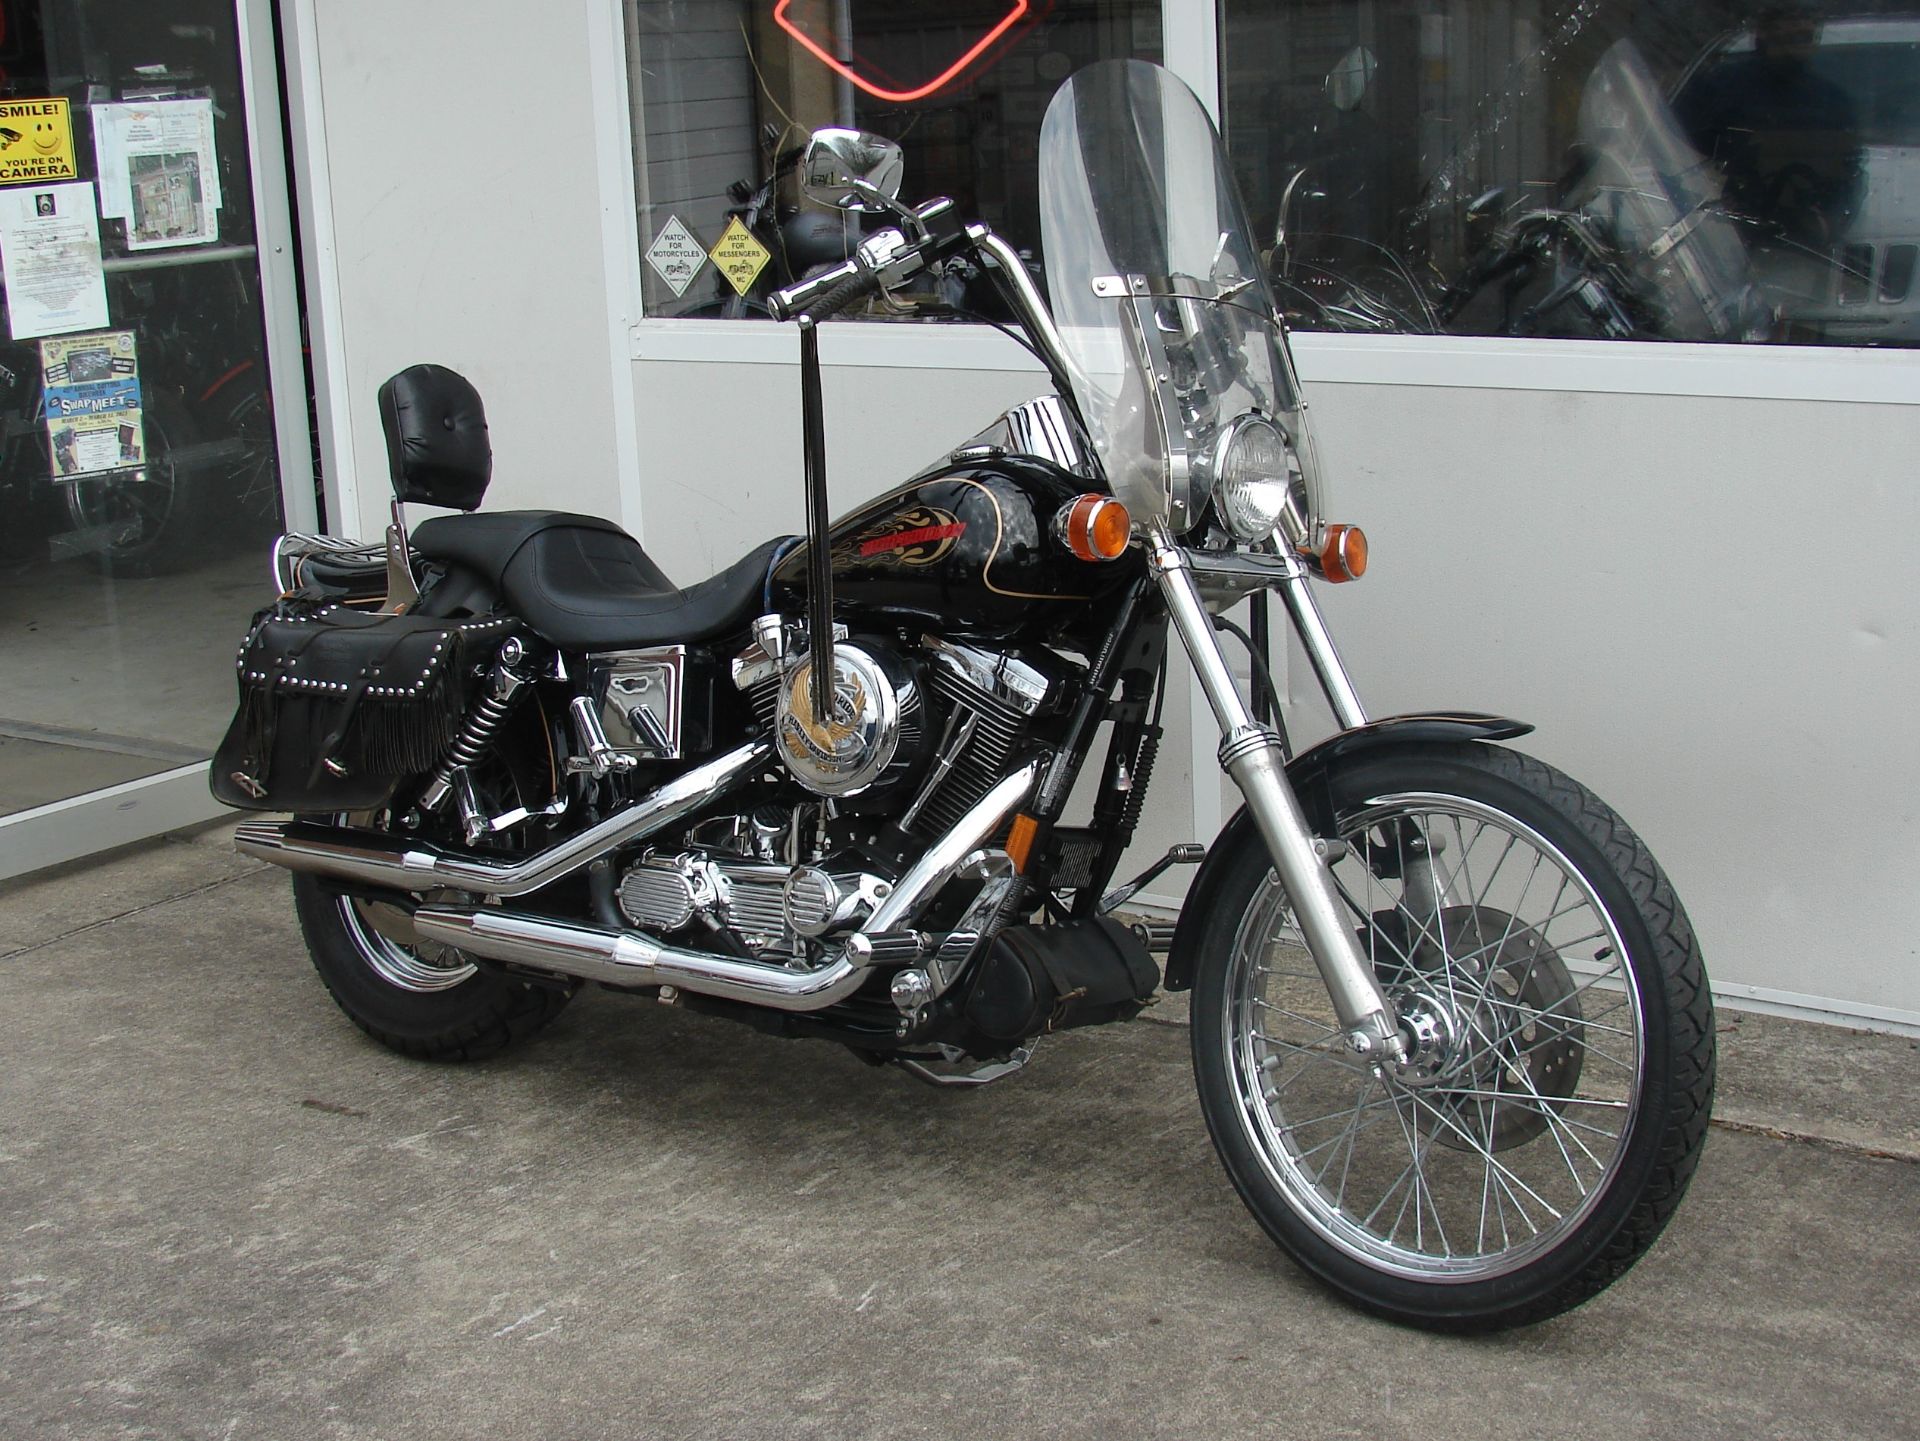 1997 Harley-Davidson FXDWG Dyna Wide Glide in Williamstown, New Jersey - Photo 3